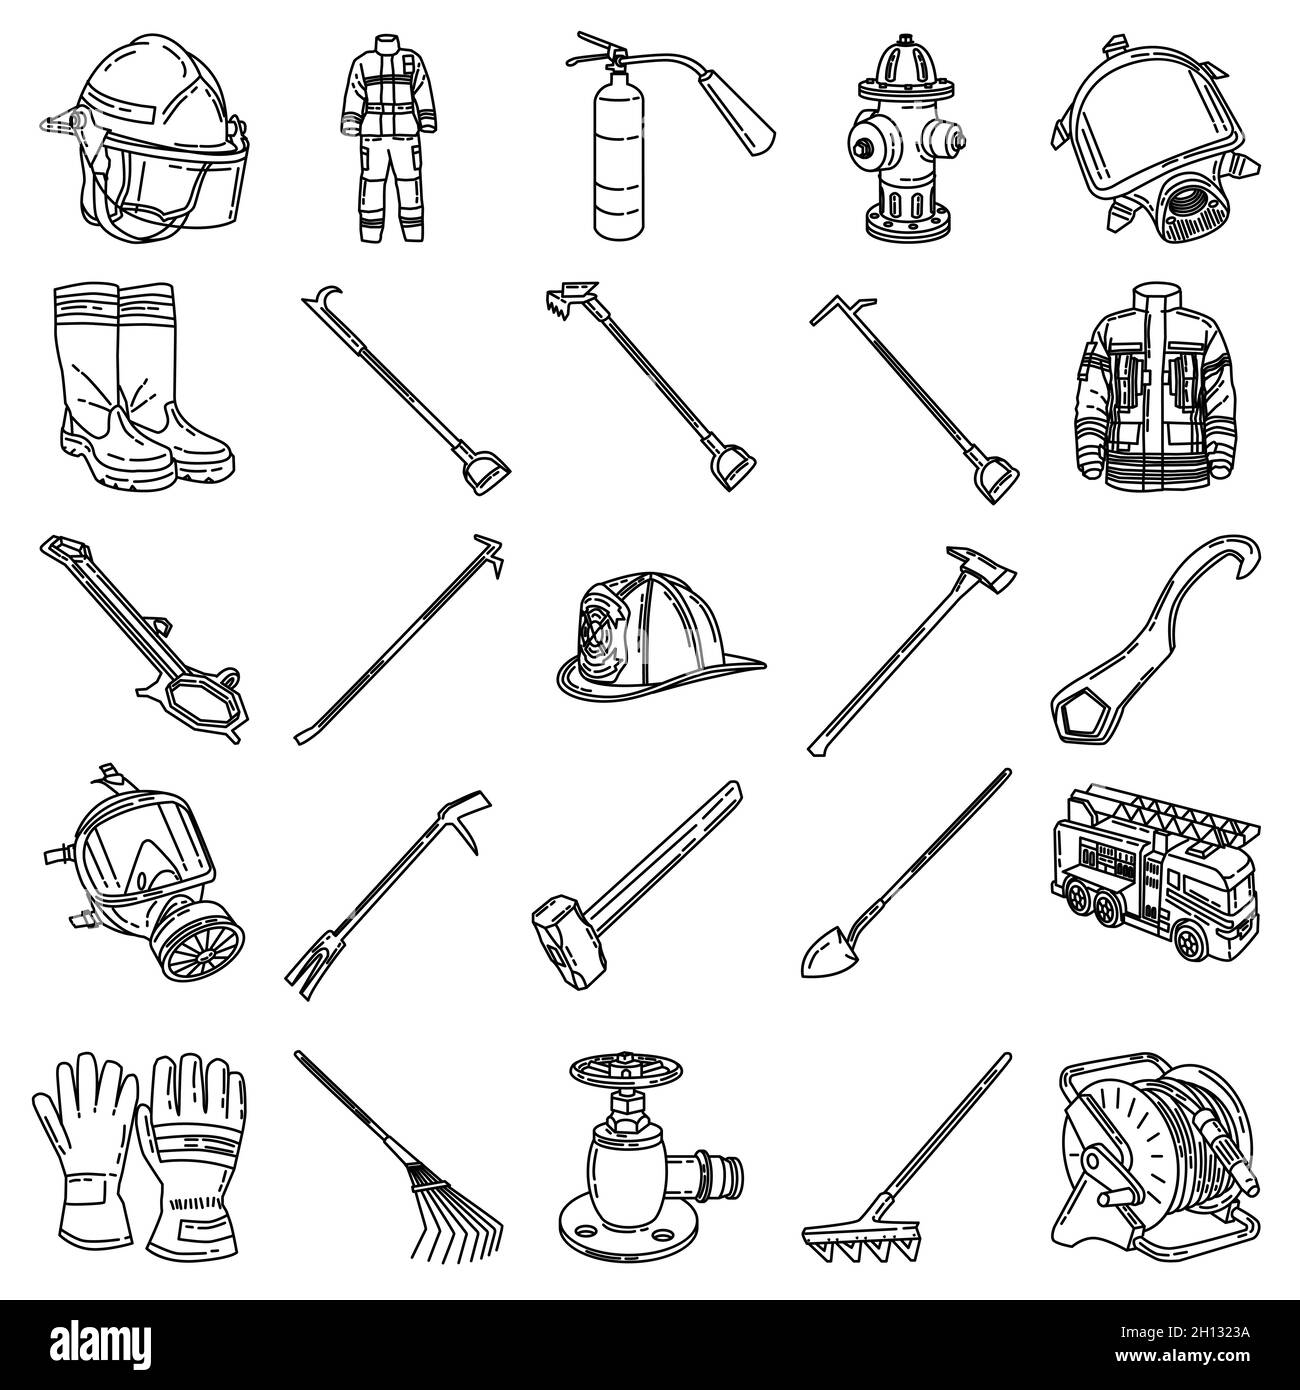 Firefighter Accessories and Equipment Device Hand Drawn Icon Set Vector. Stock Vector